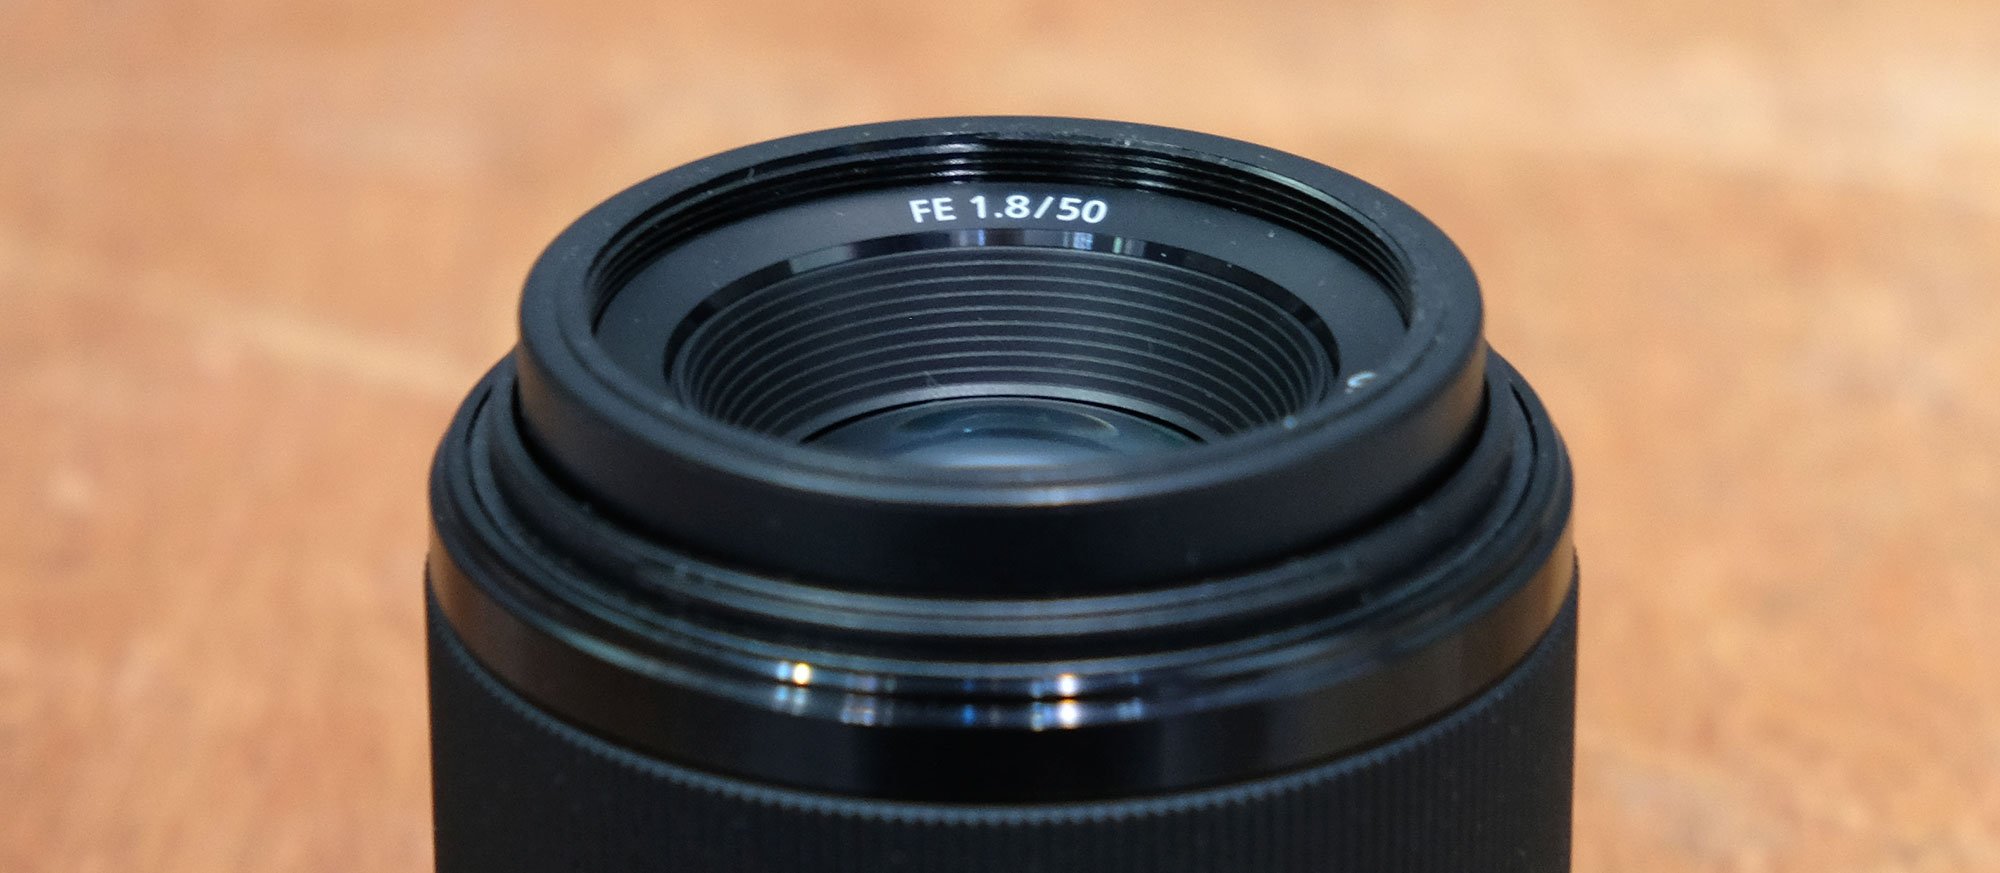 Sony FE 50mm f1.8 review | Cameralabs